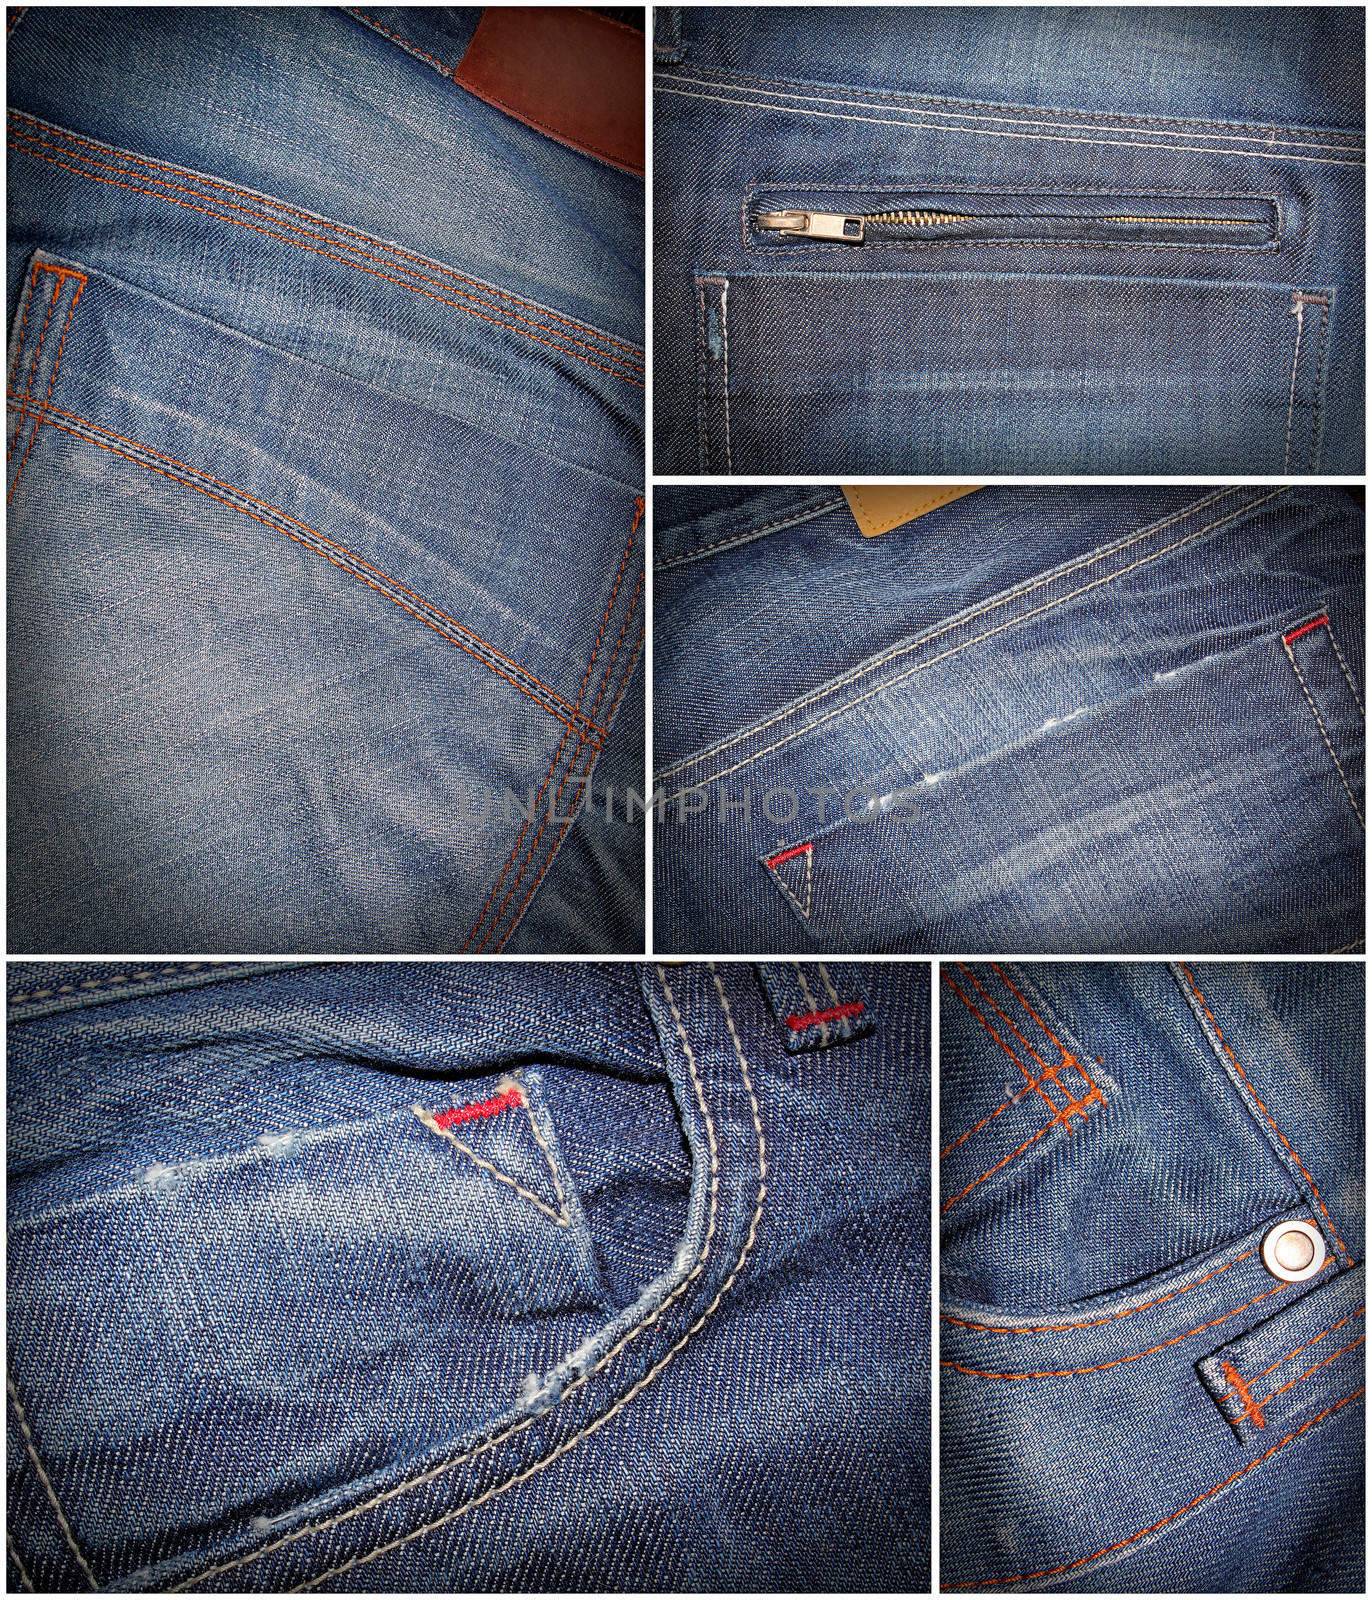 Jeans fassion collage by dynamicfoto